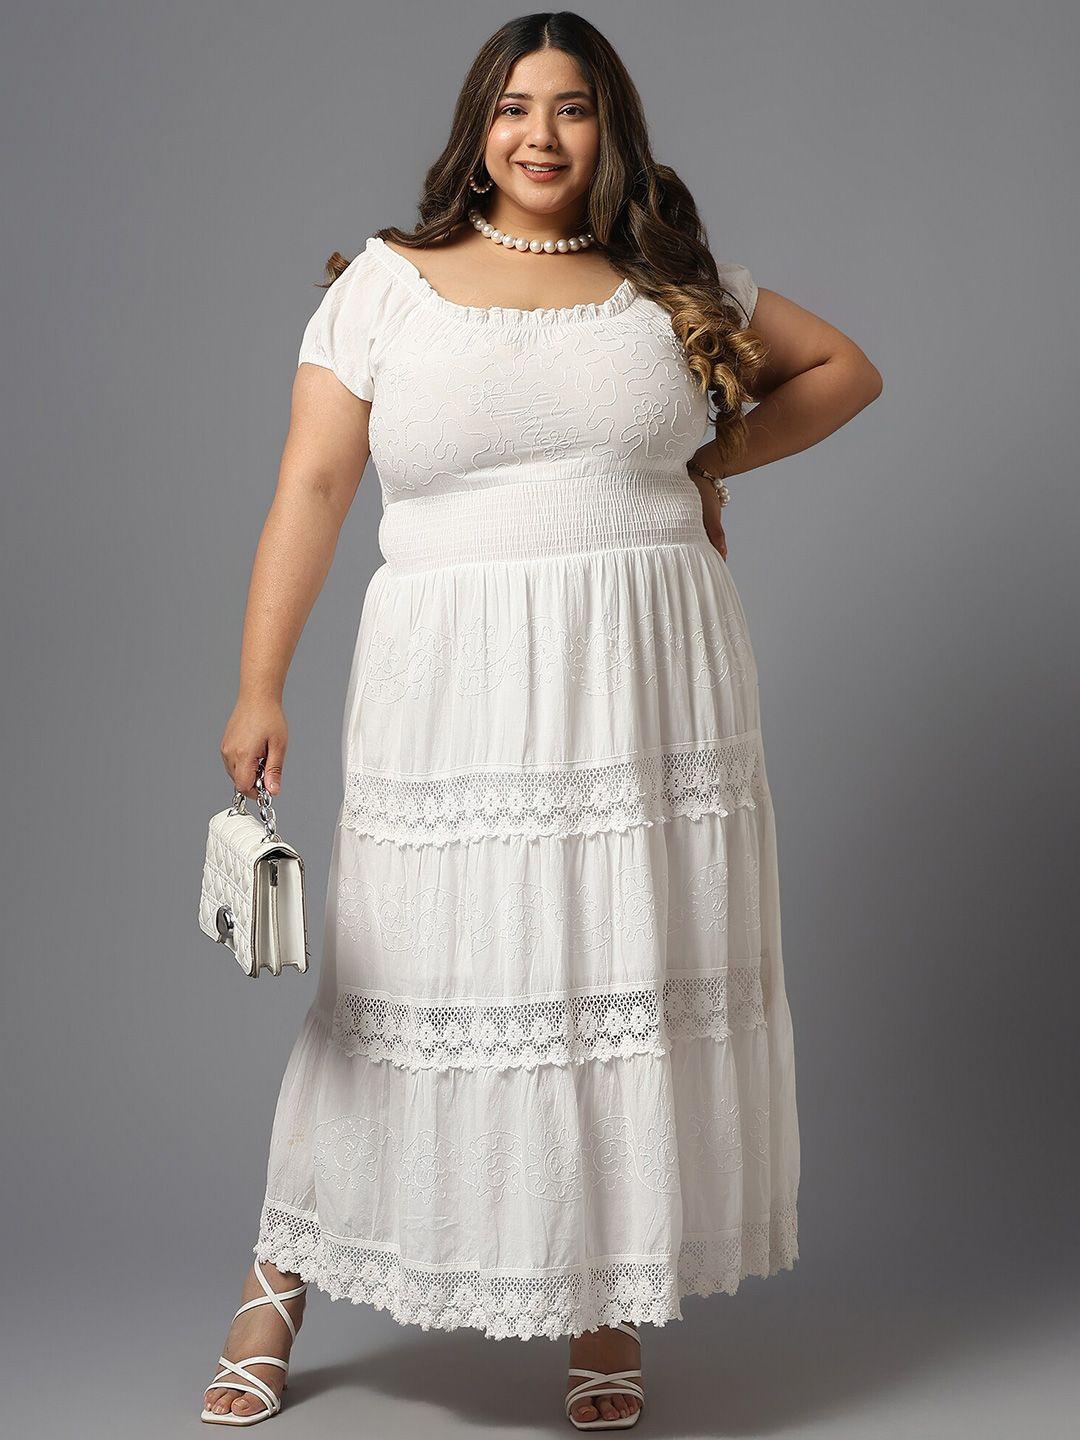 saakaa-plus-size-floral-embroidered-square-neck-smocked-tiered-cotton-maxi-dress